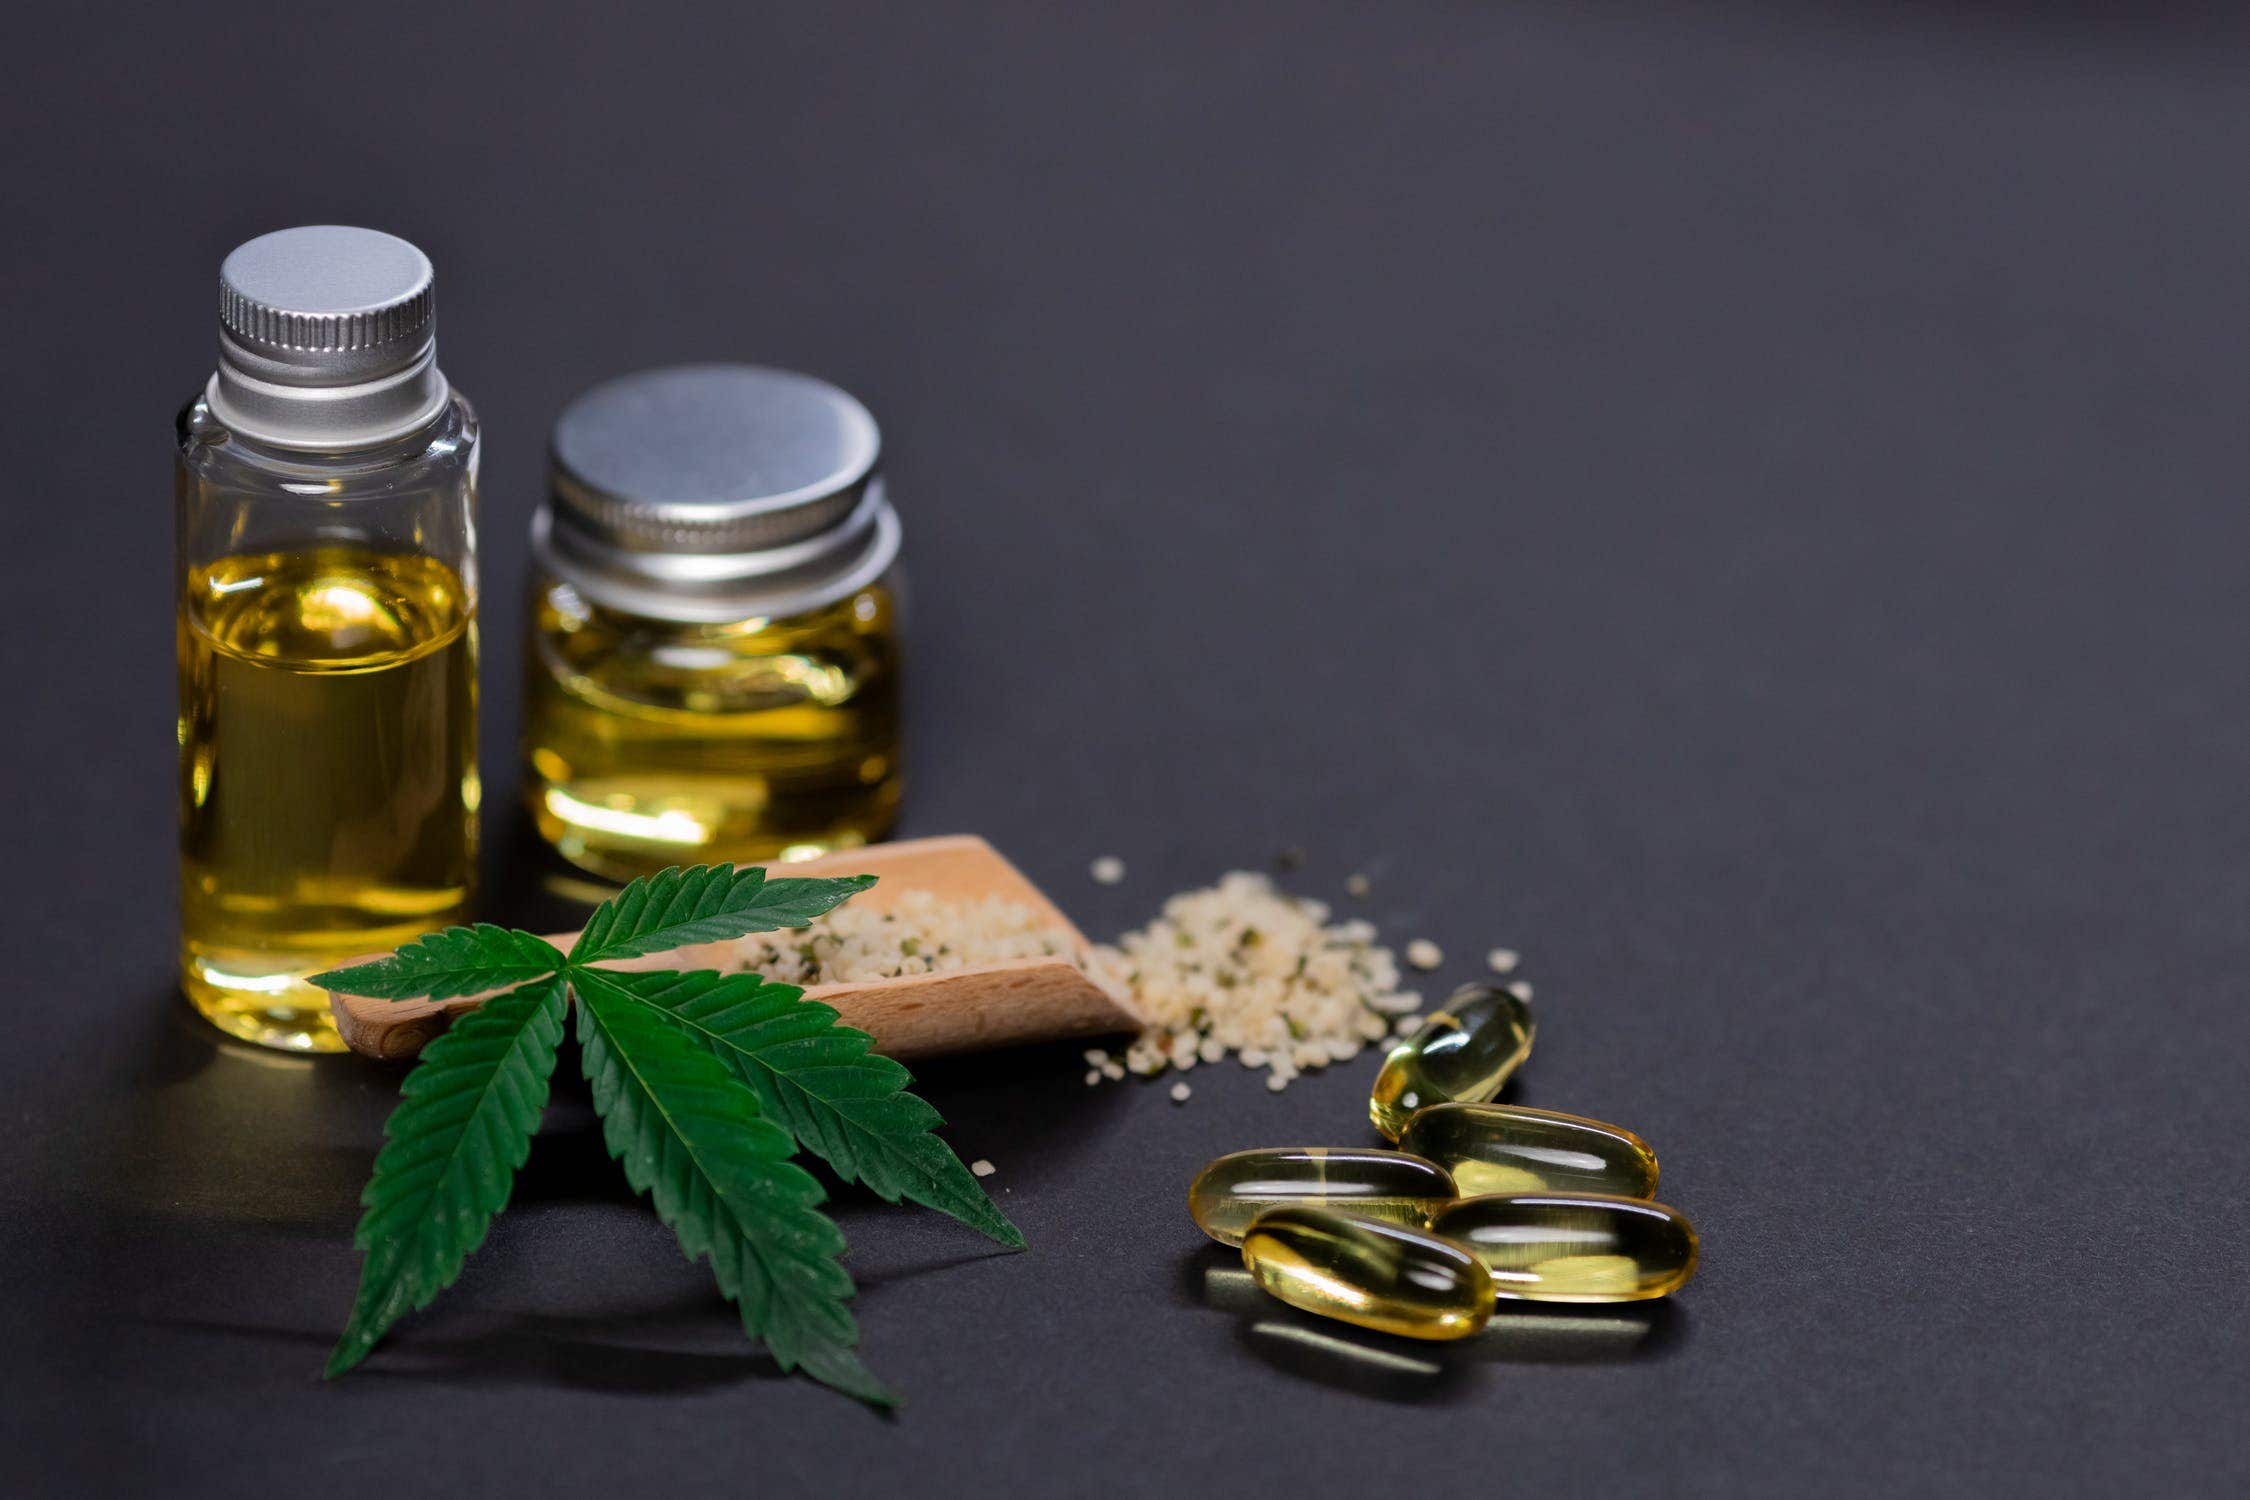 This Company's 18-Month CBD Stability Achievement Could Hint Towards Expansion Goals As It Plans To Release First Commercial UST System In 2022